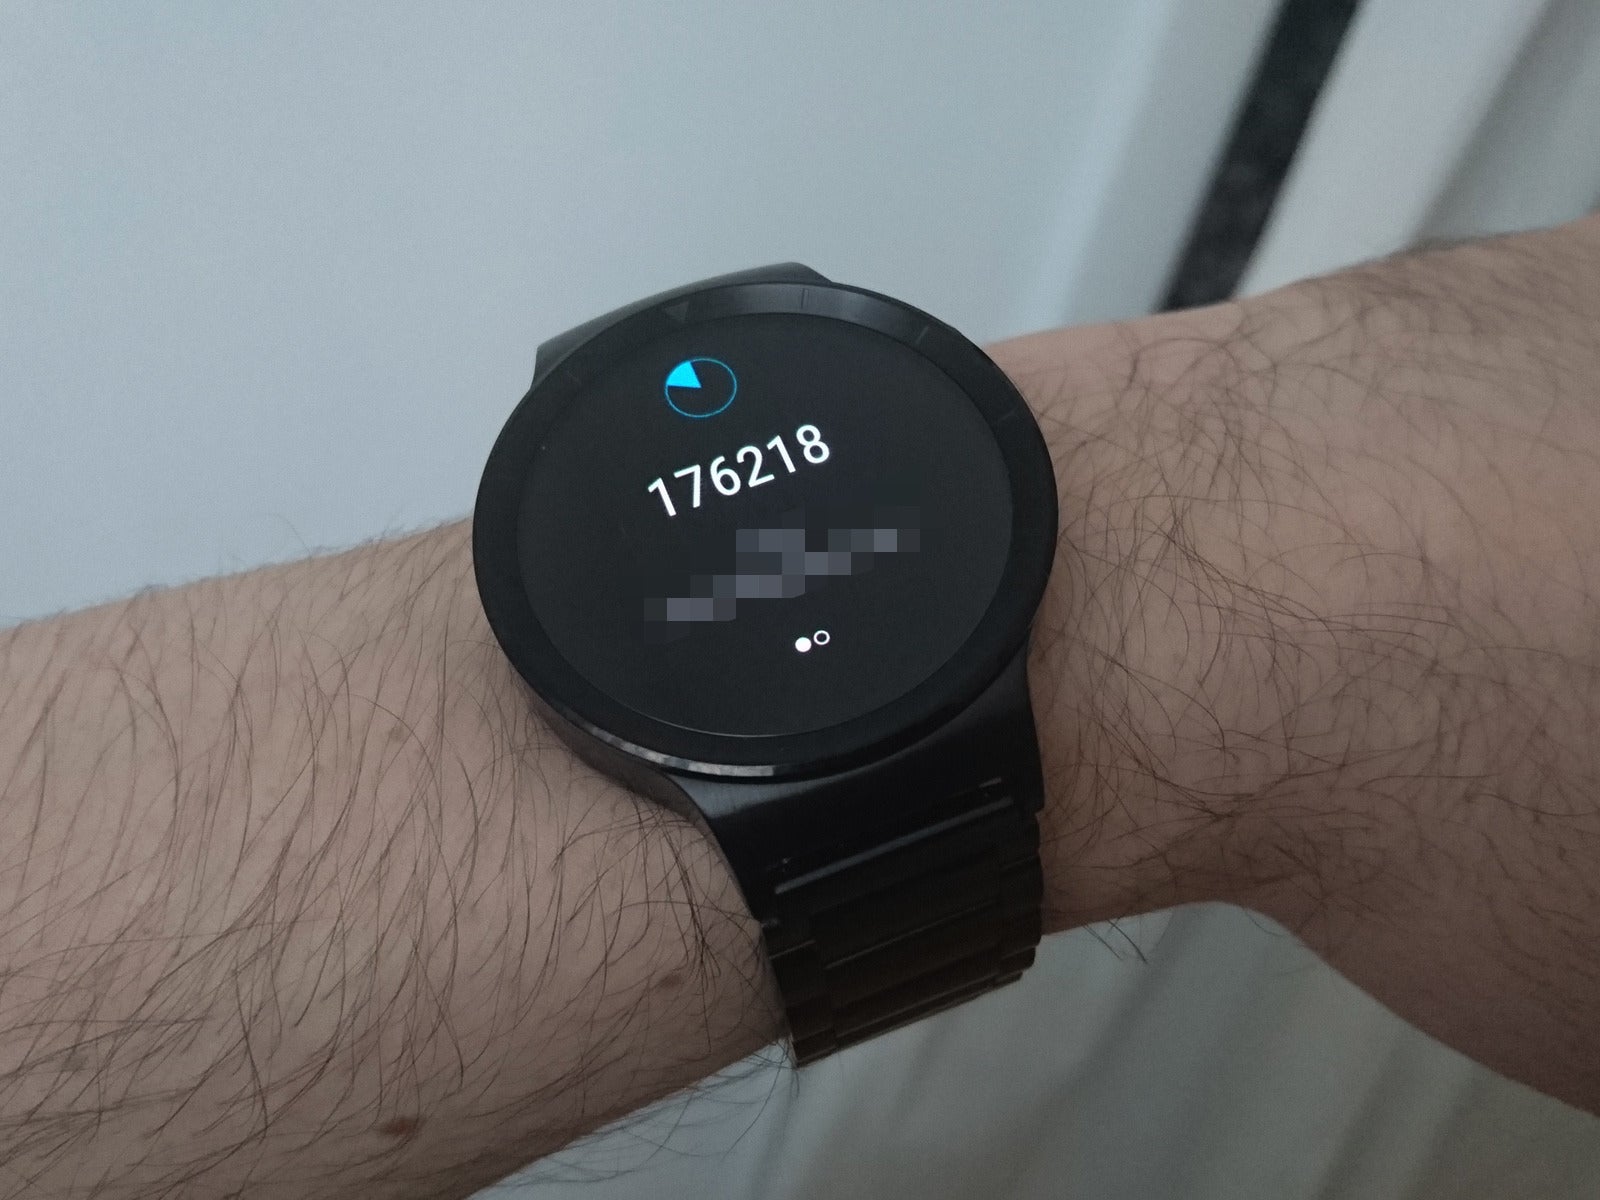 The best Android Wear apps of 2015 